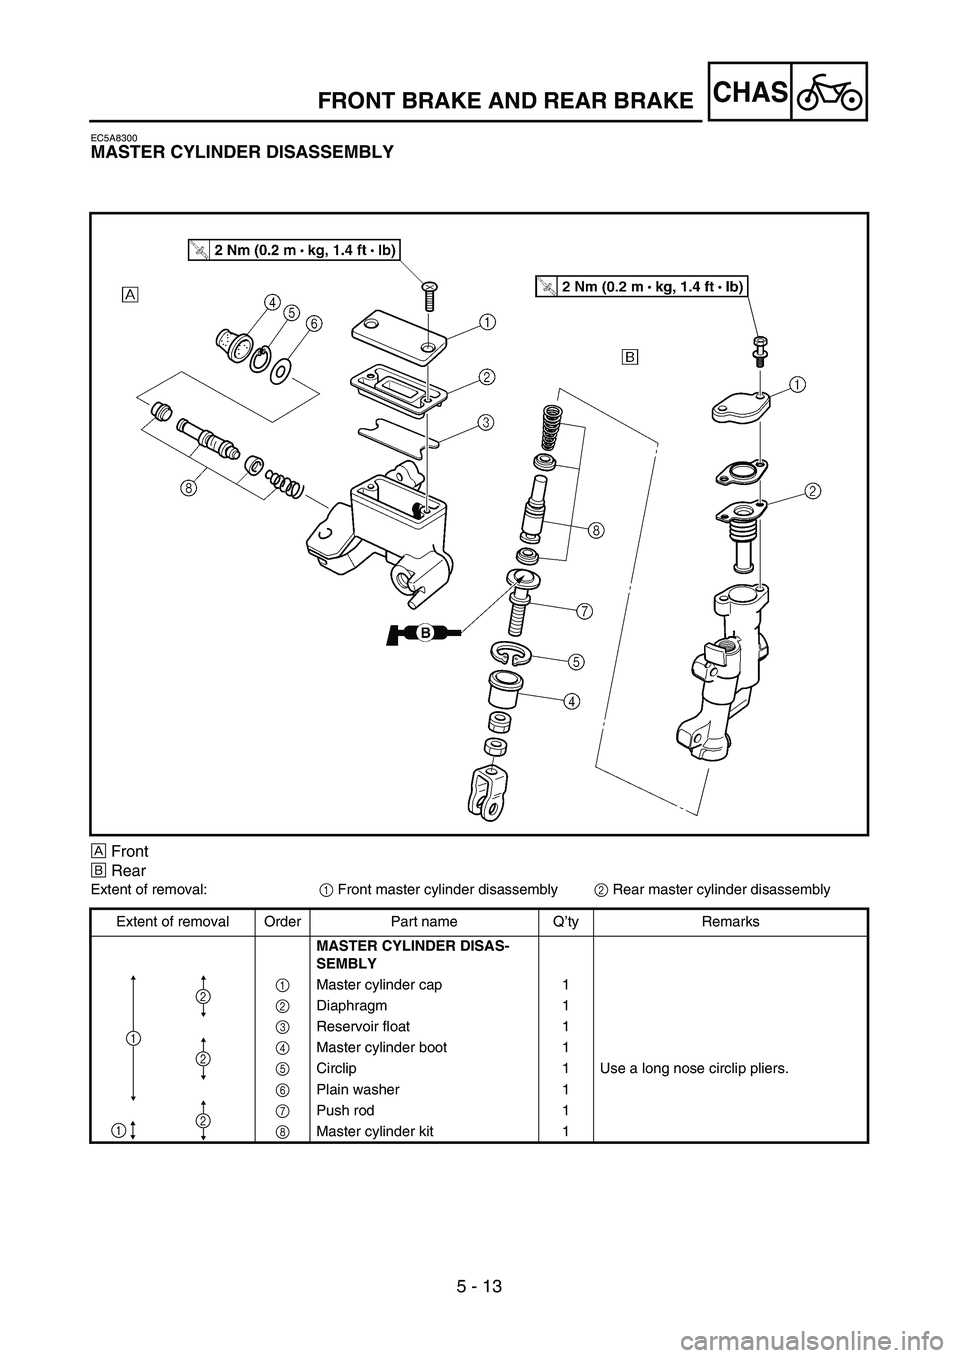 YAMAHA YZ450F 2004  Owners Manual 5 - 13
CHASFRONT BRAKE AND REAR BRAKE
EC5A8300
MASTER CYLINDER DISASSEMBLY
ÅFront
ıRear
Extent of removal:1 Front master cylinder disassembly2 Rear master cylinder disassembly
Extent of removal Orde